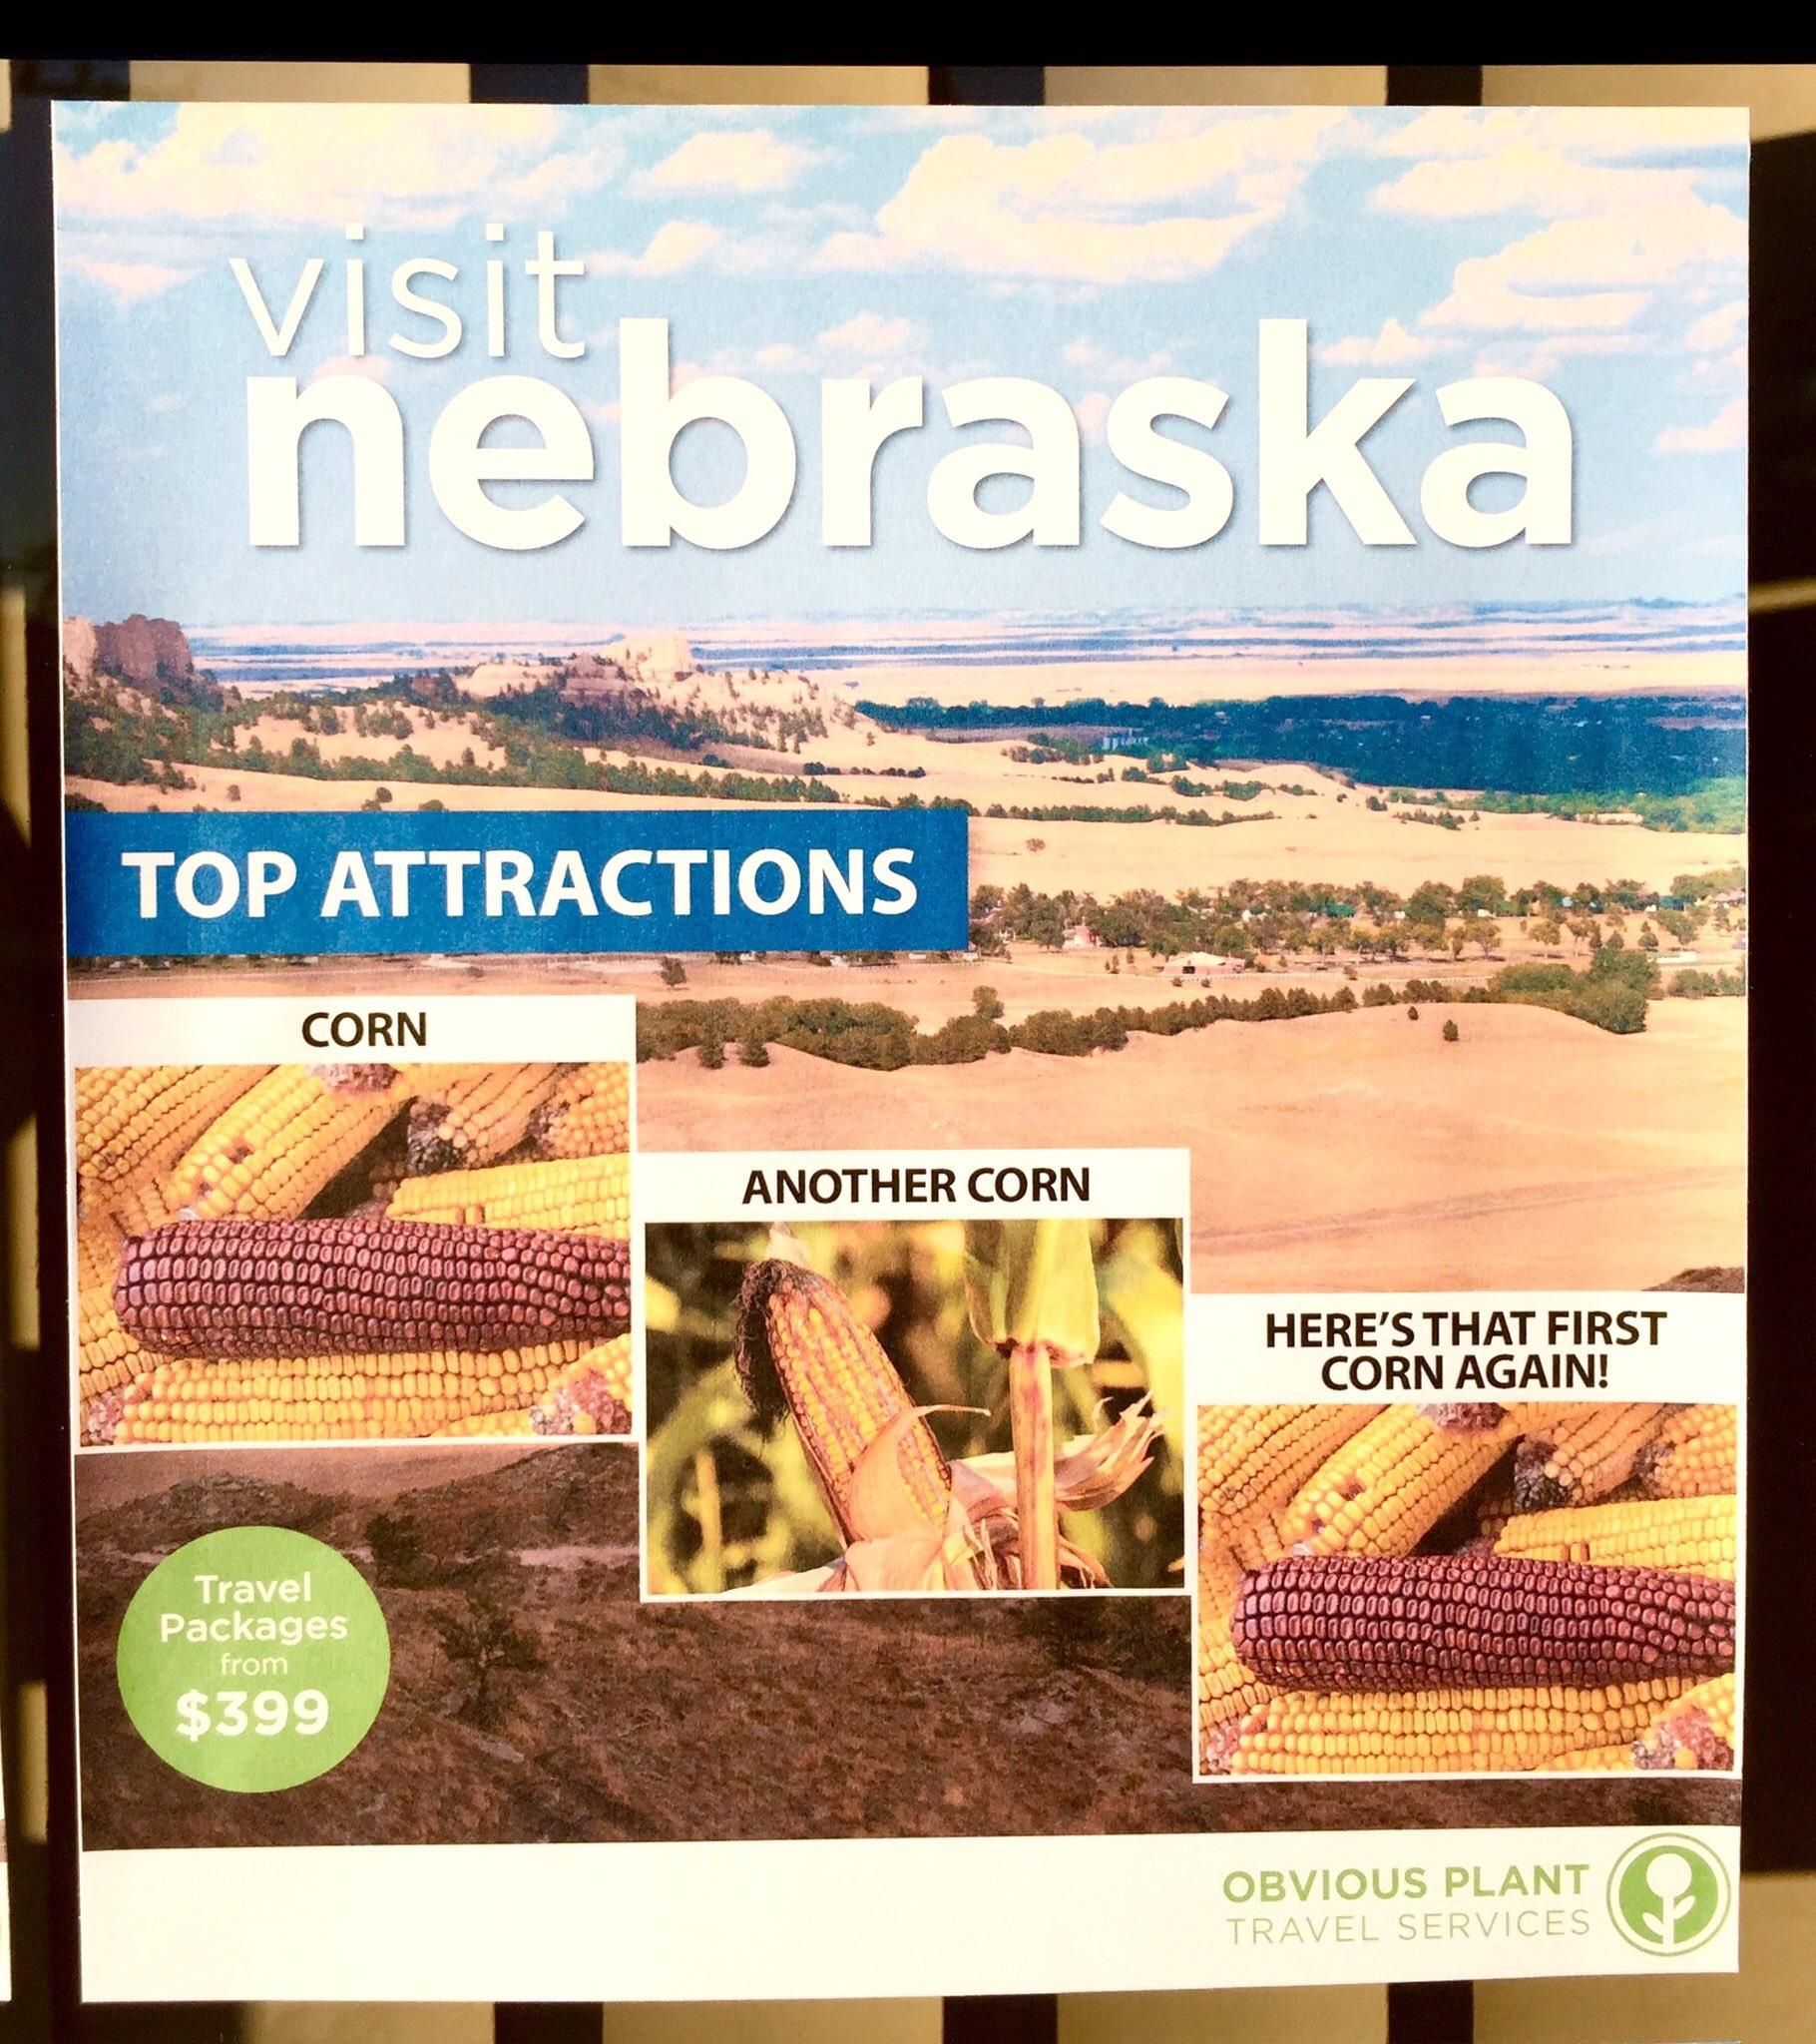 tourism ads - hebraska Top Attractions Corn Another Corn Here'S That First Corn Again! Travel Packages $399 Obvious Plant Ricevi